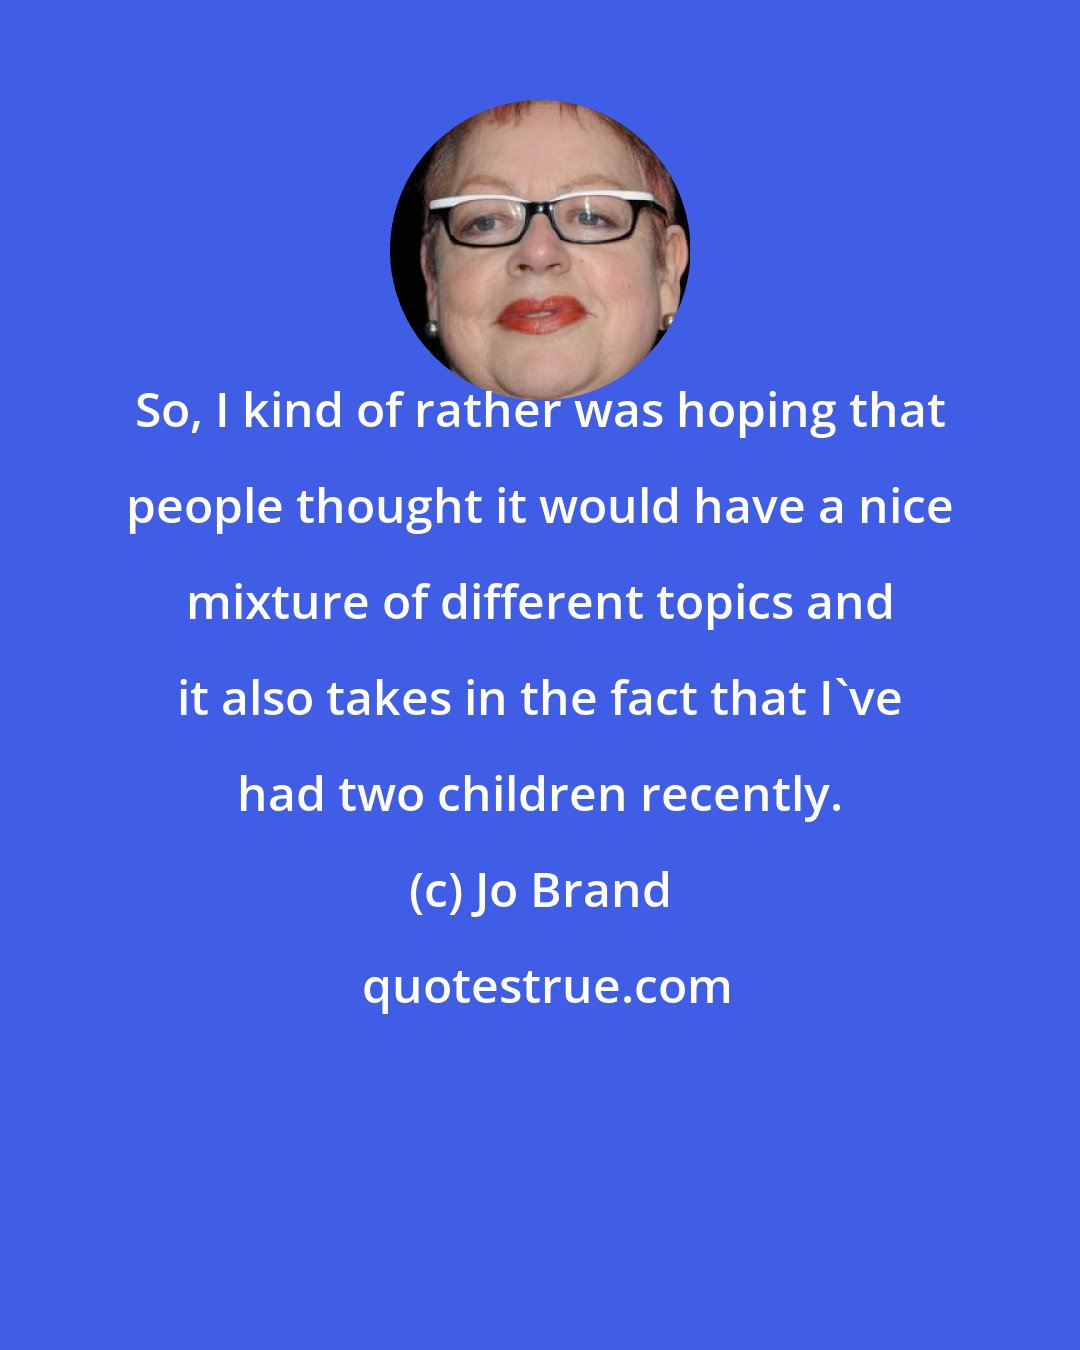 Jo Brand: So, I kind of rather was hoping that people thought it would have a nice mixture of different topics and it also takes in the fact that I've had two children recently.